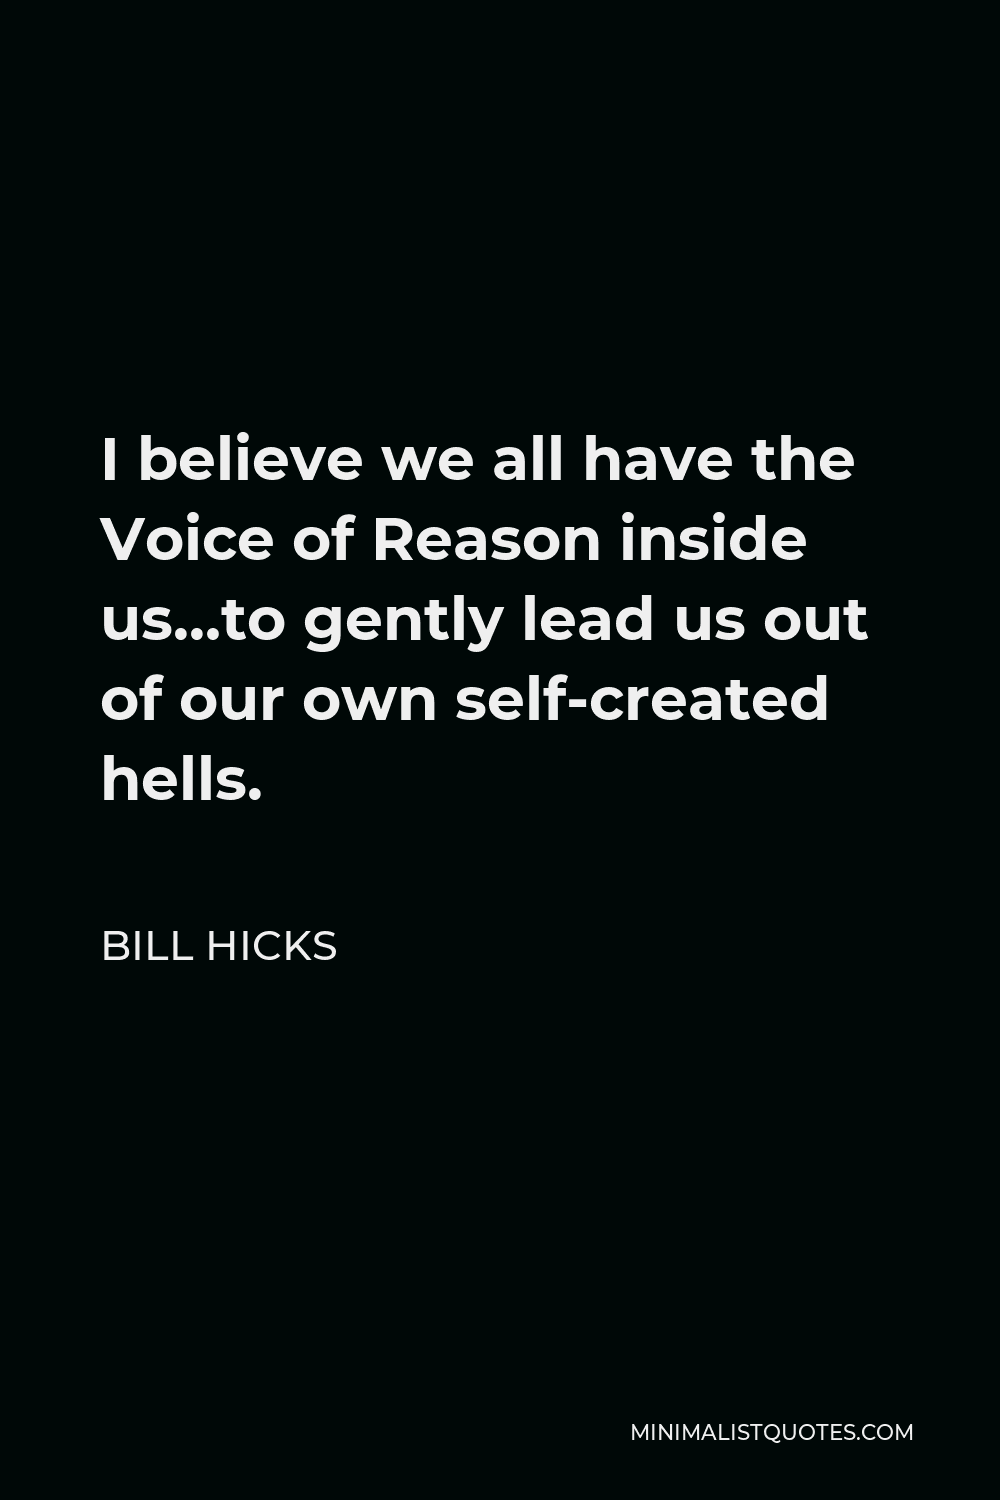 Bill Hicks Quote - I believe we all have the Voice of Reason inside us…to gently lead us out of our own self-created hells.